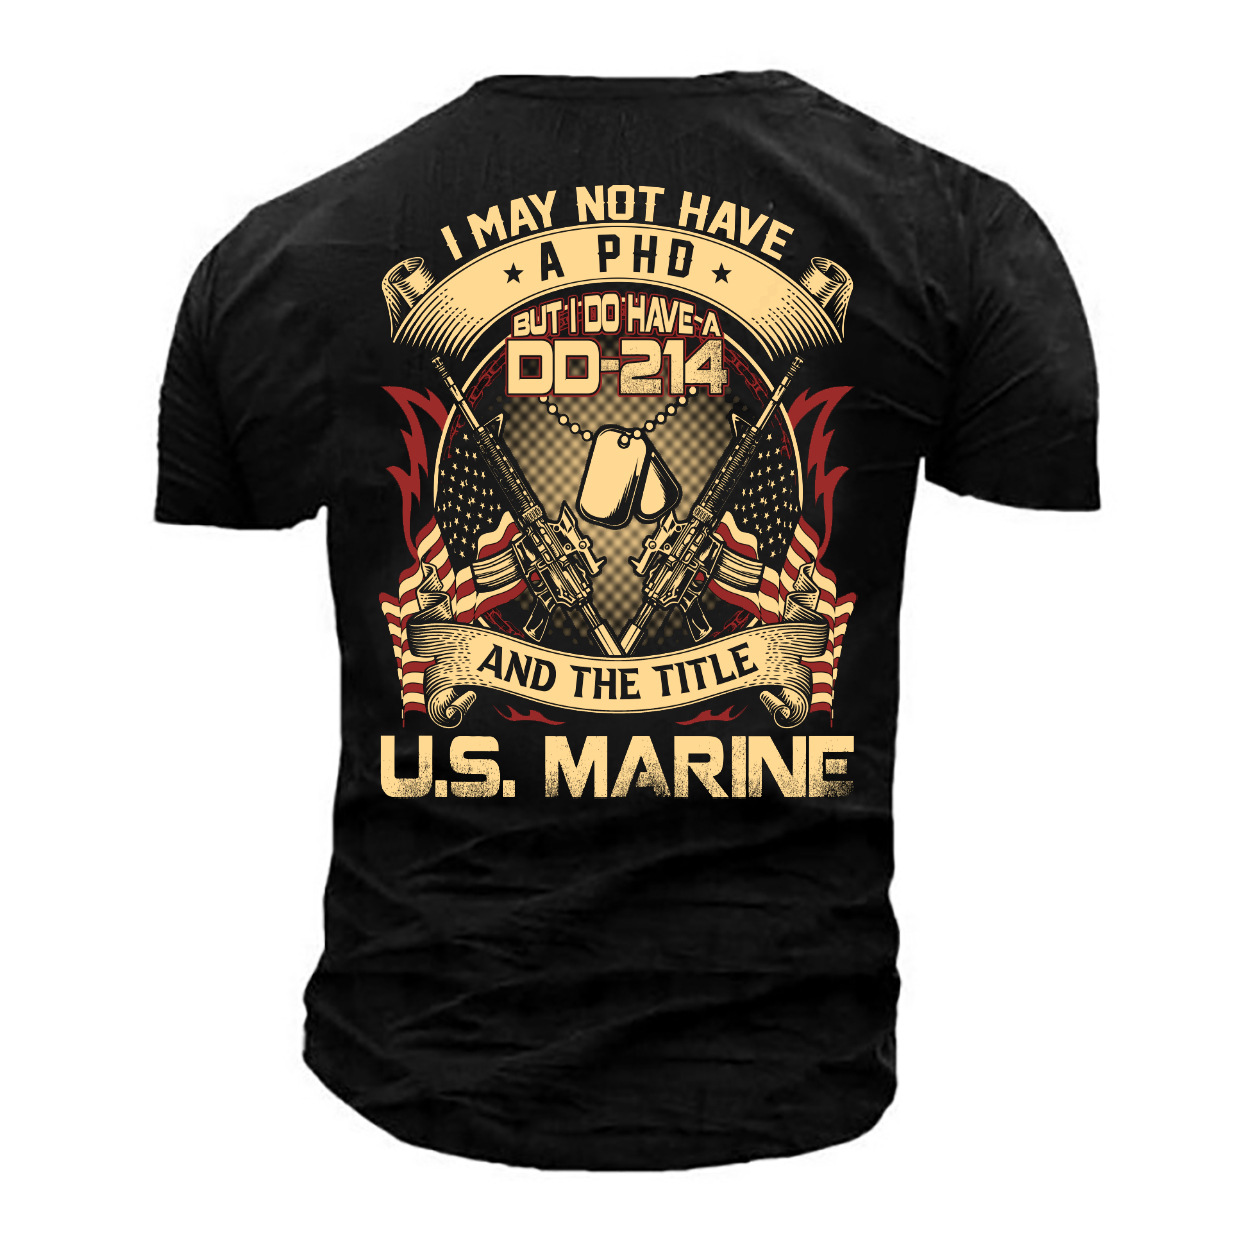 Men's Outdoor Tactical I Chic May Not Have A Phd But I Do Have A Dd-214 Printed Cotton T-shirt